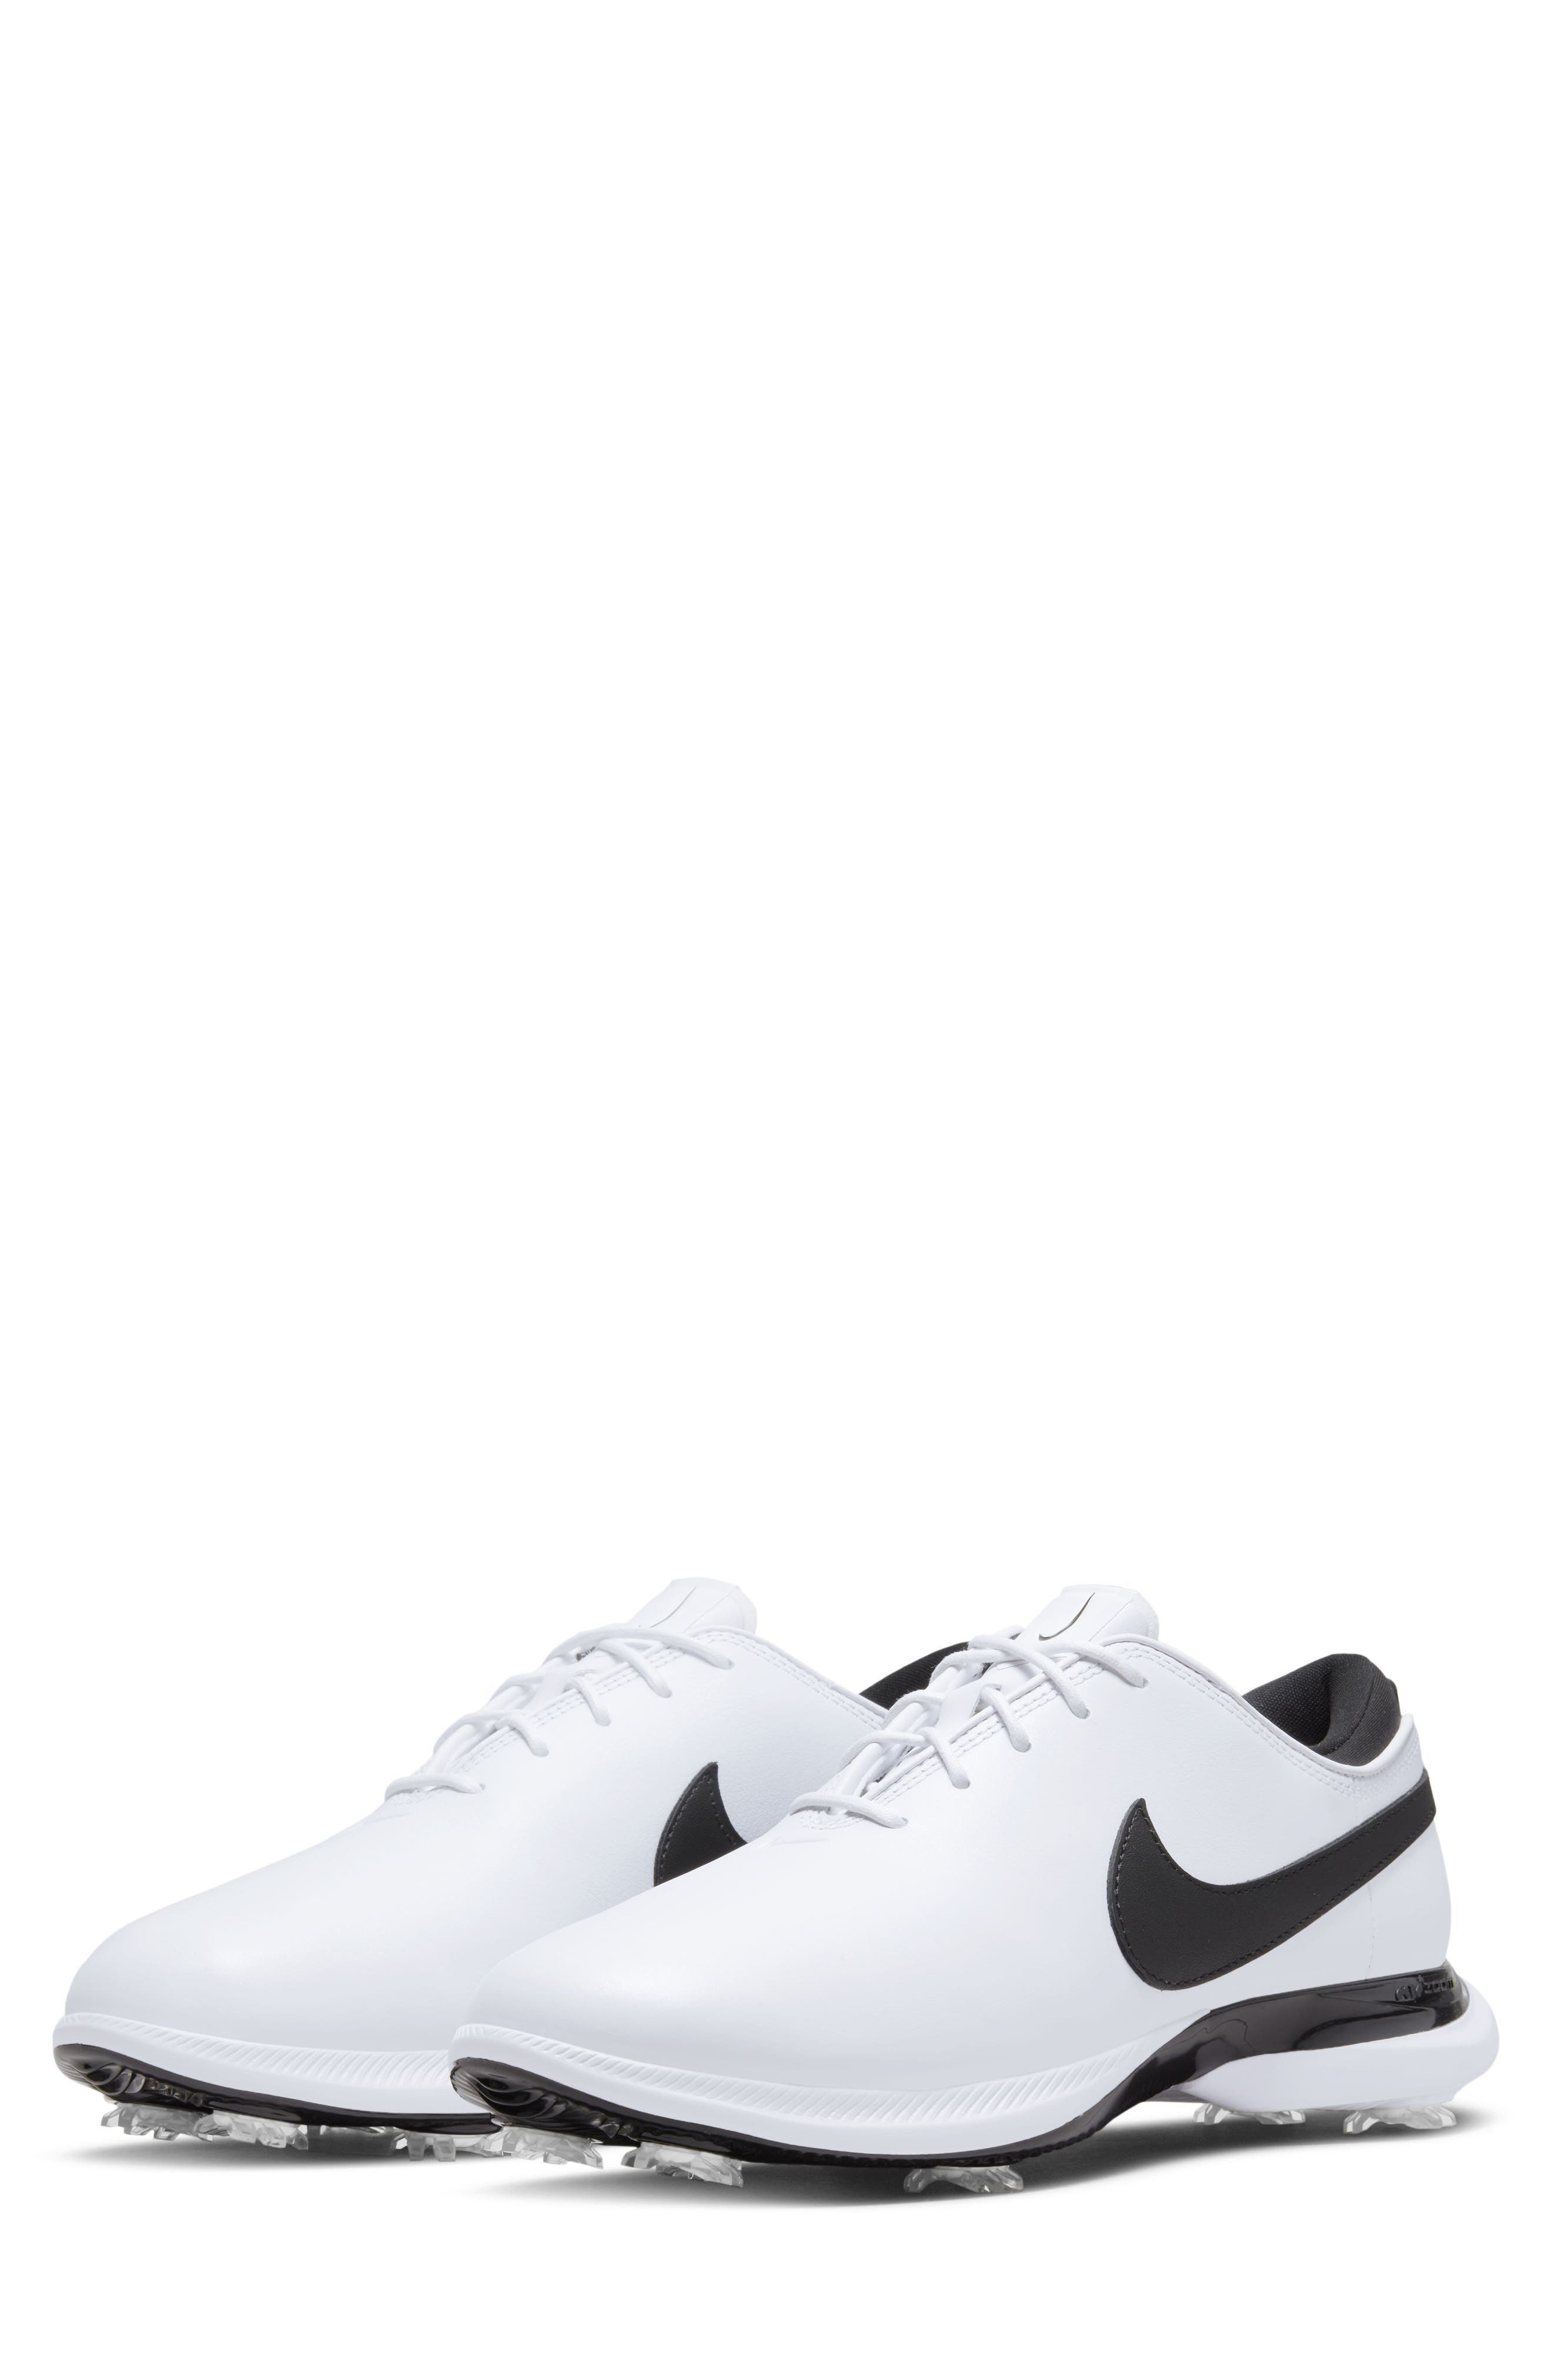 nike air zoom victory tour men's golf shoes reviews